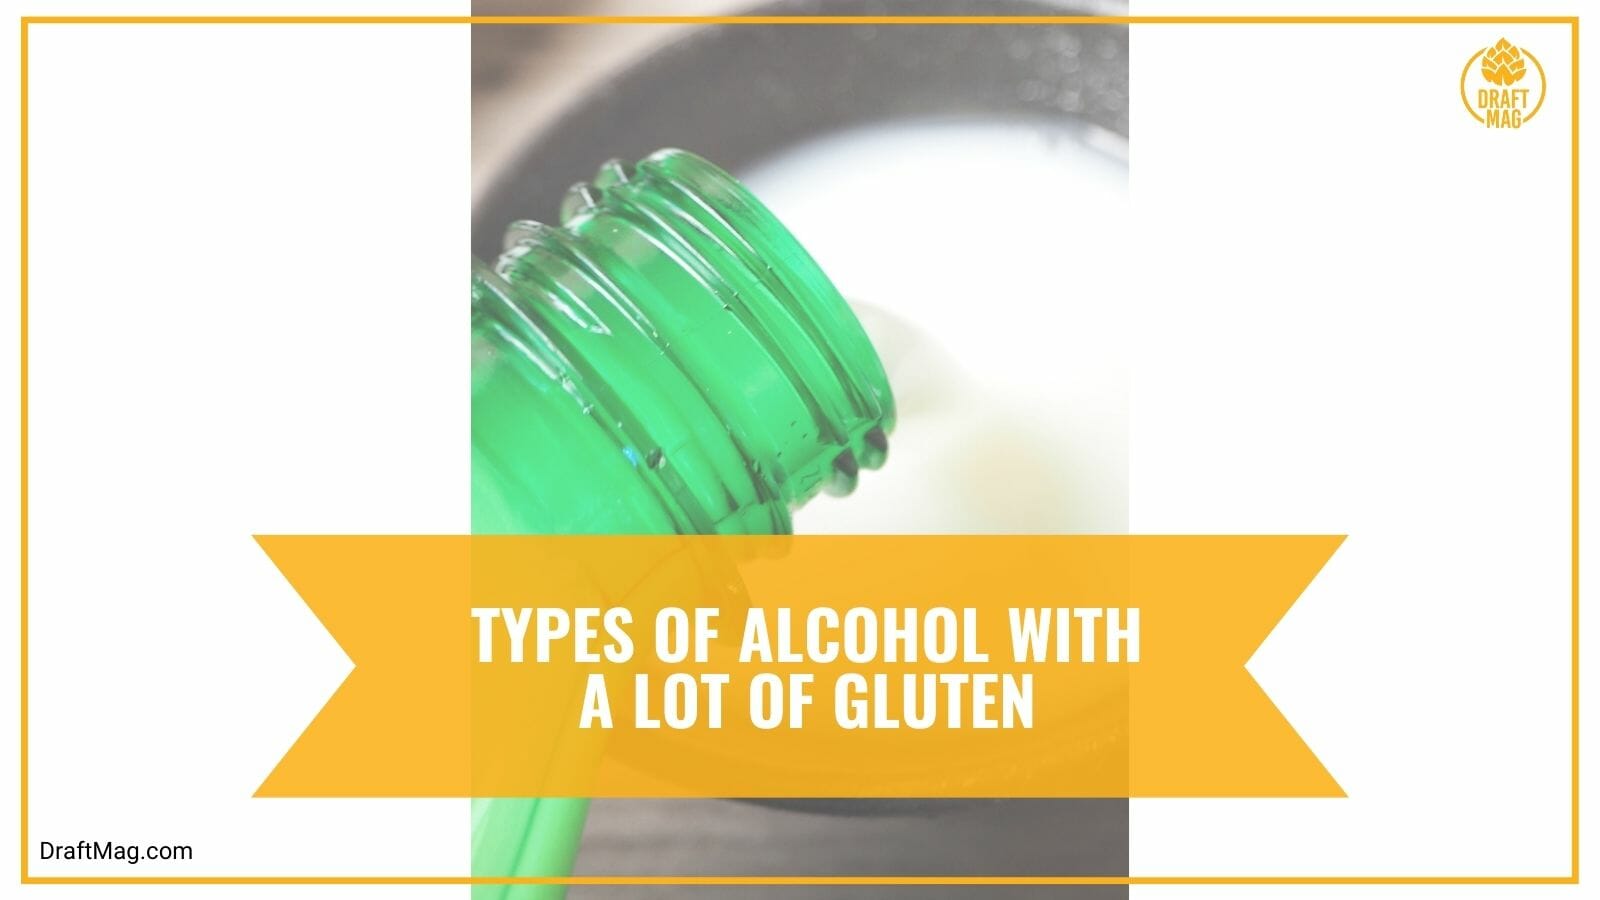 Types of Alcohol With a Lot of Gluten